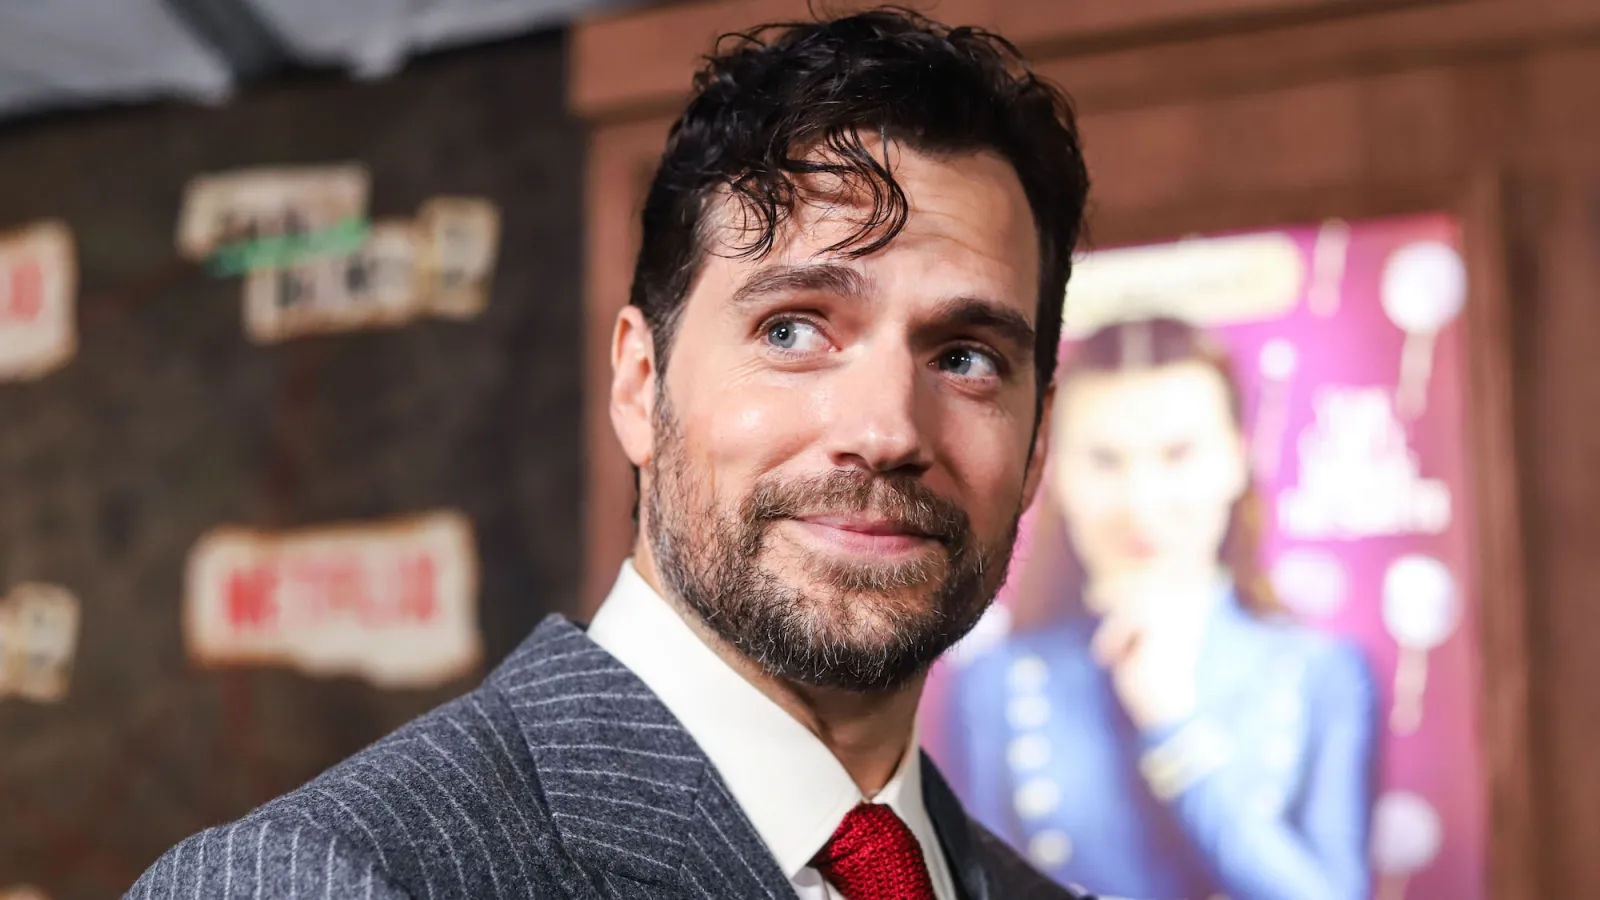 Henry Cavill Opens Up About Discomfort with Sex Scenes, Admits 'I Don't Understand Them'